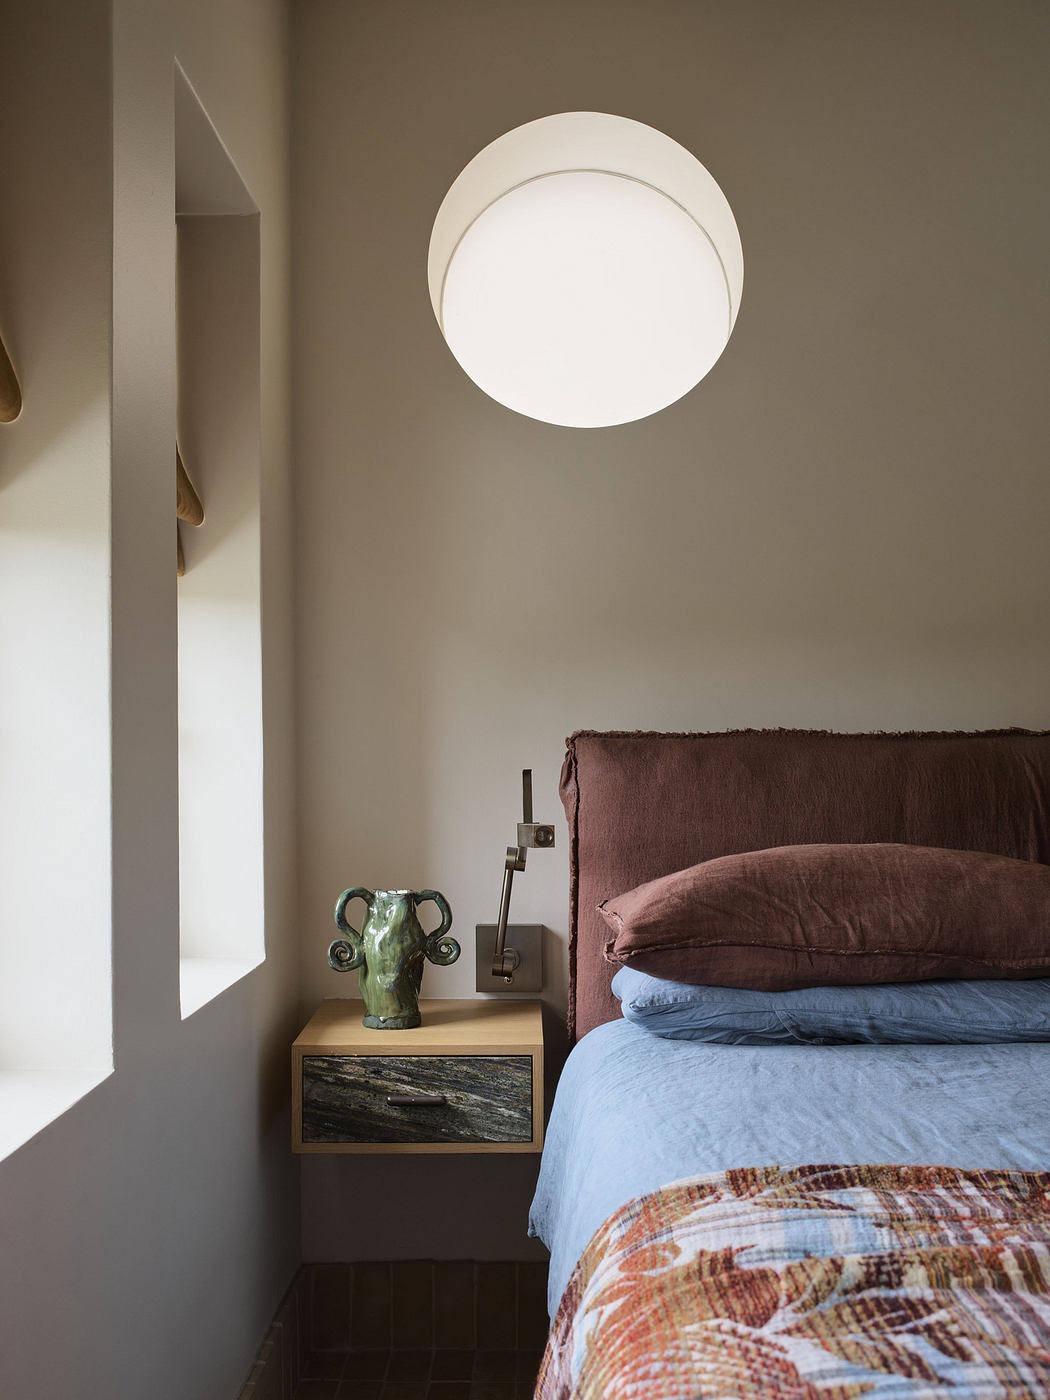 Modern bedroom corner with circular wall lamp, bedside table, and earth-toned bedding